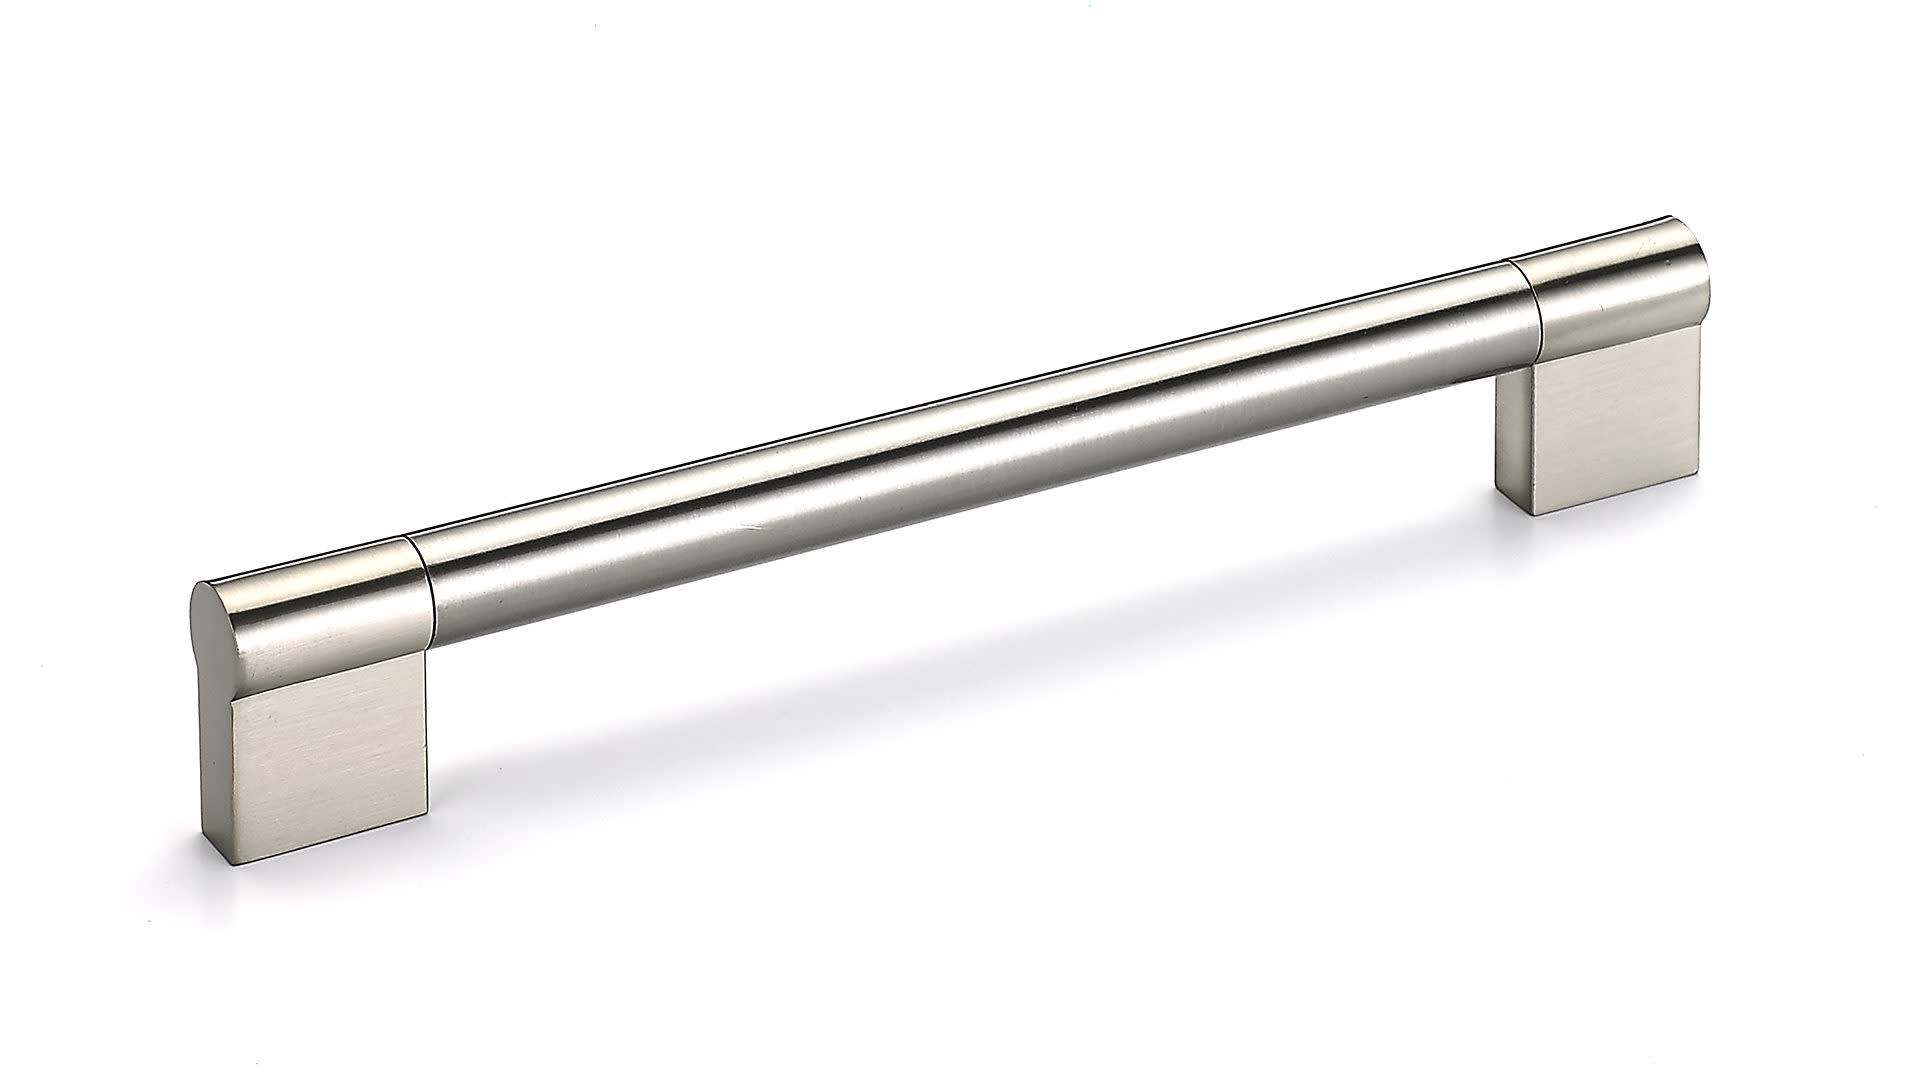 Richelieu Bp527416 16-3/8" Center To Center Handle Cabinet Pull - Nickel - image 1 of 2